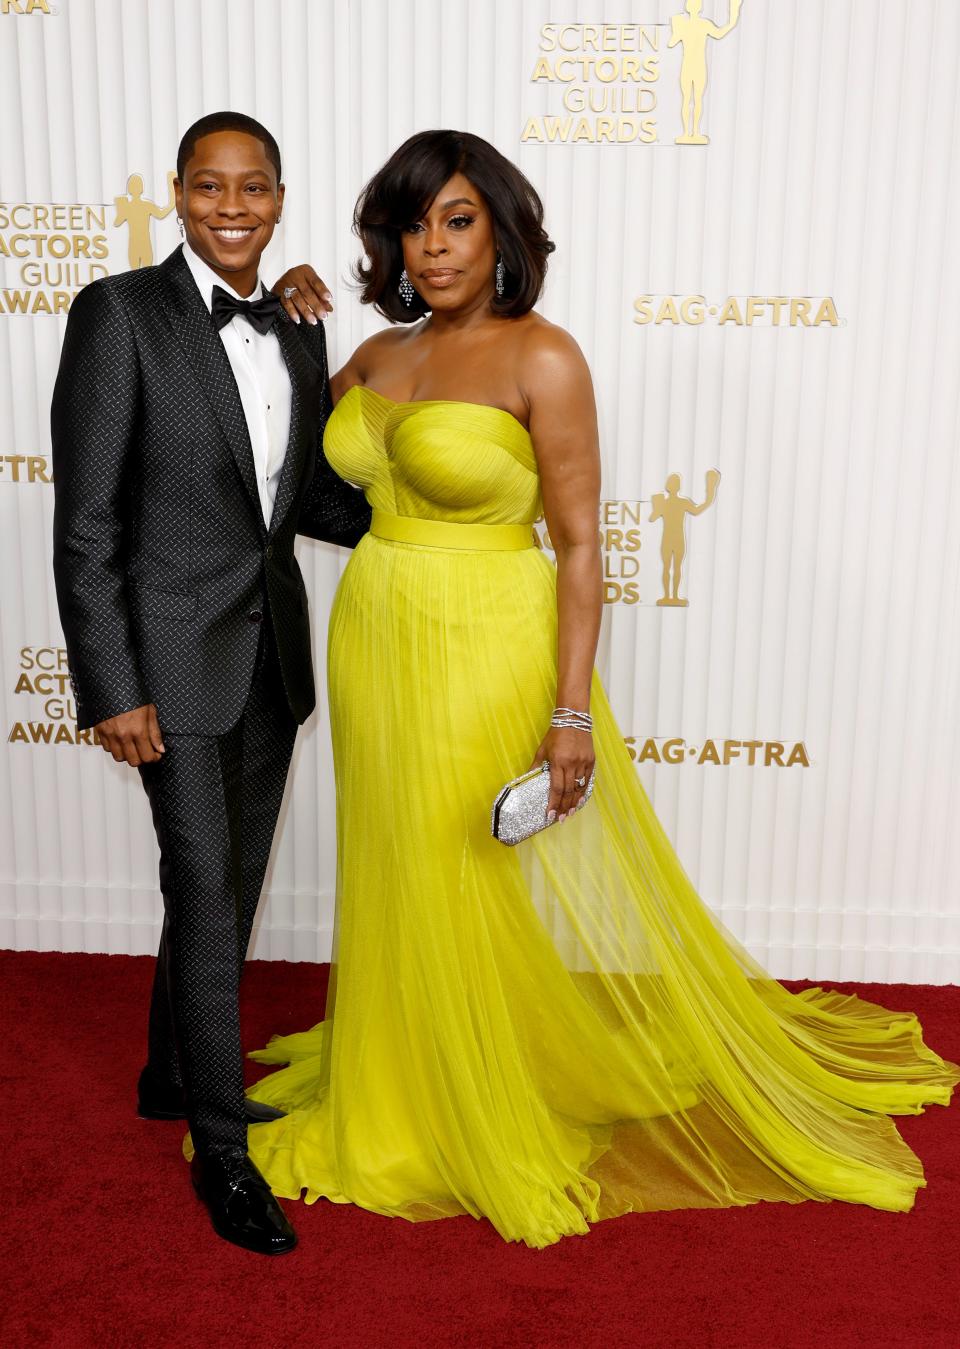 SAG awards couples best and daring looks